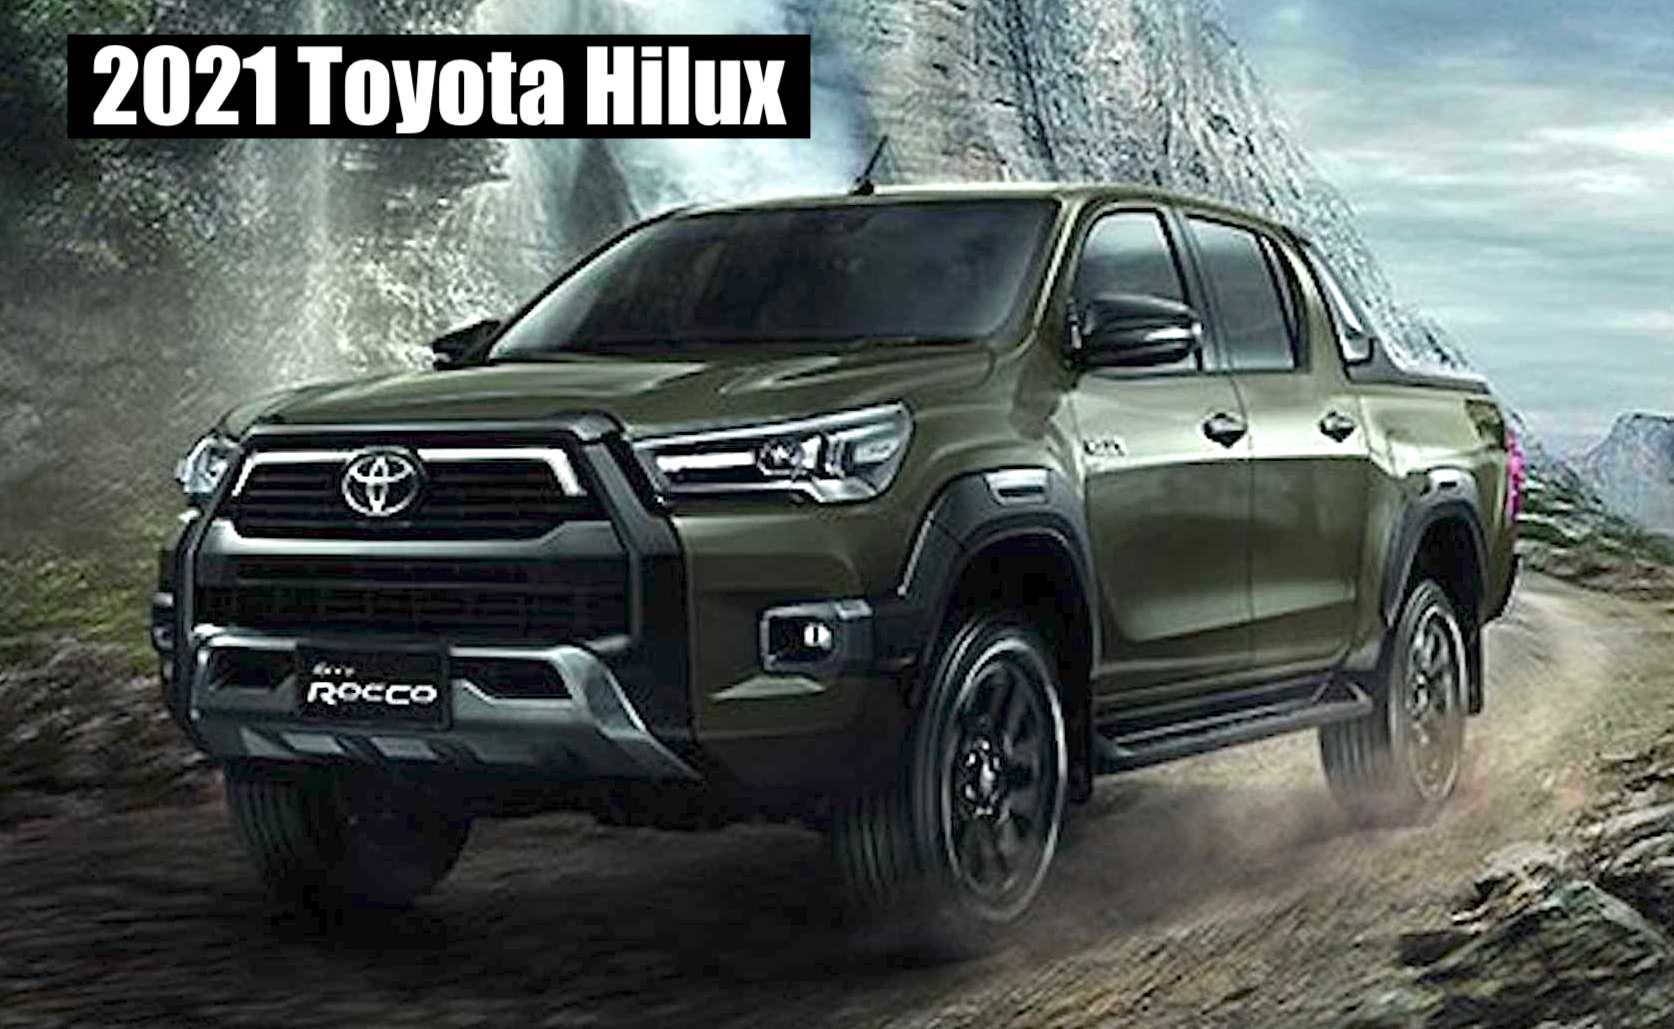 Refreshed 9 Toyota Hilux Makes Its World Debut! Does It Hint at